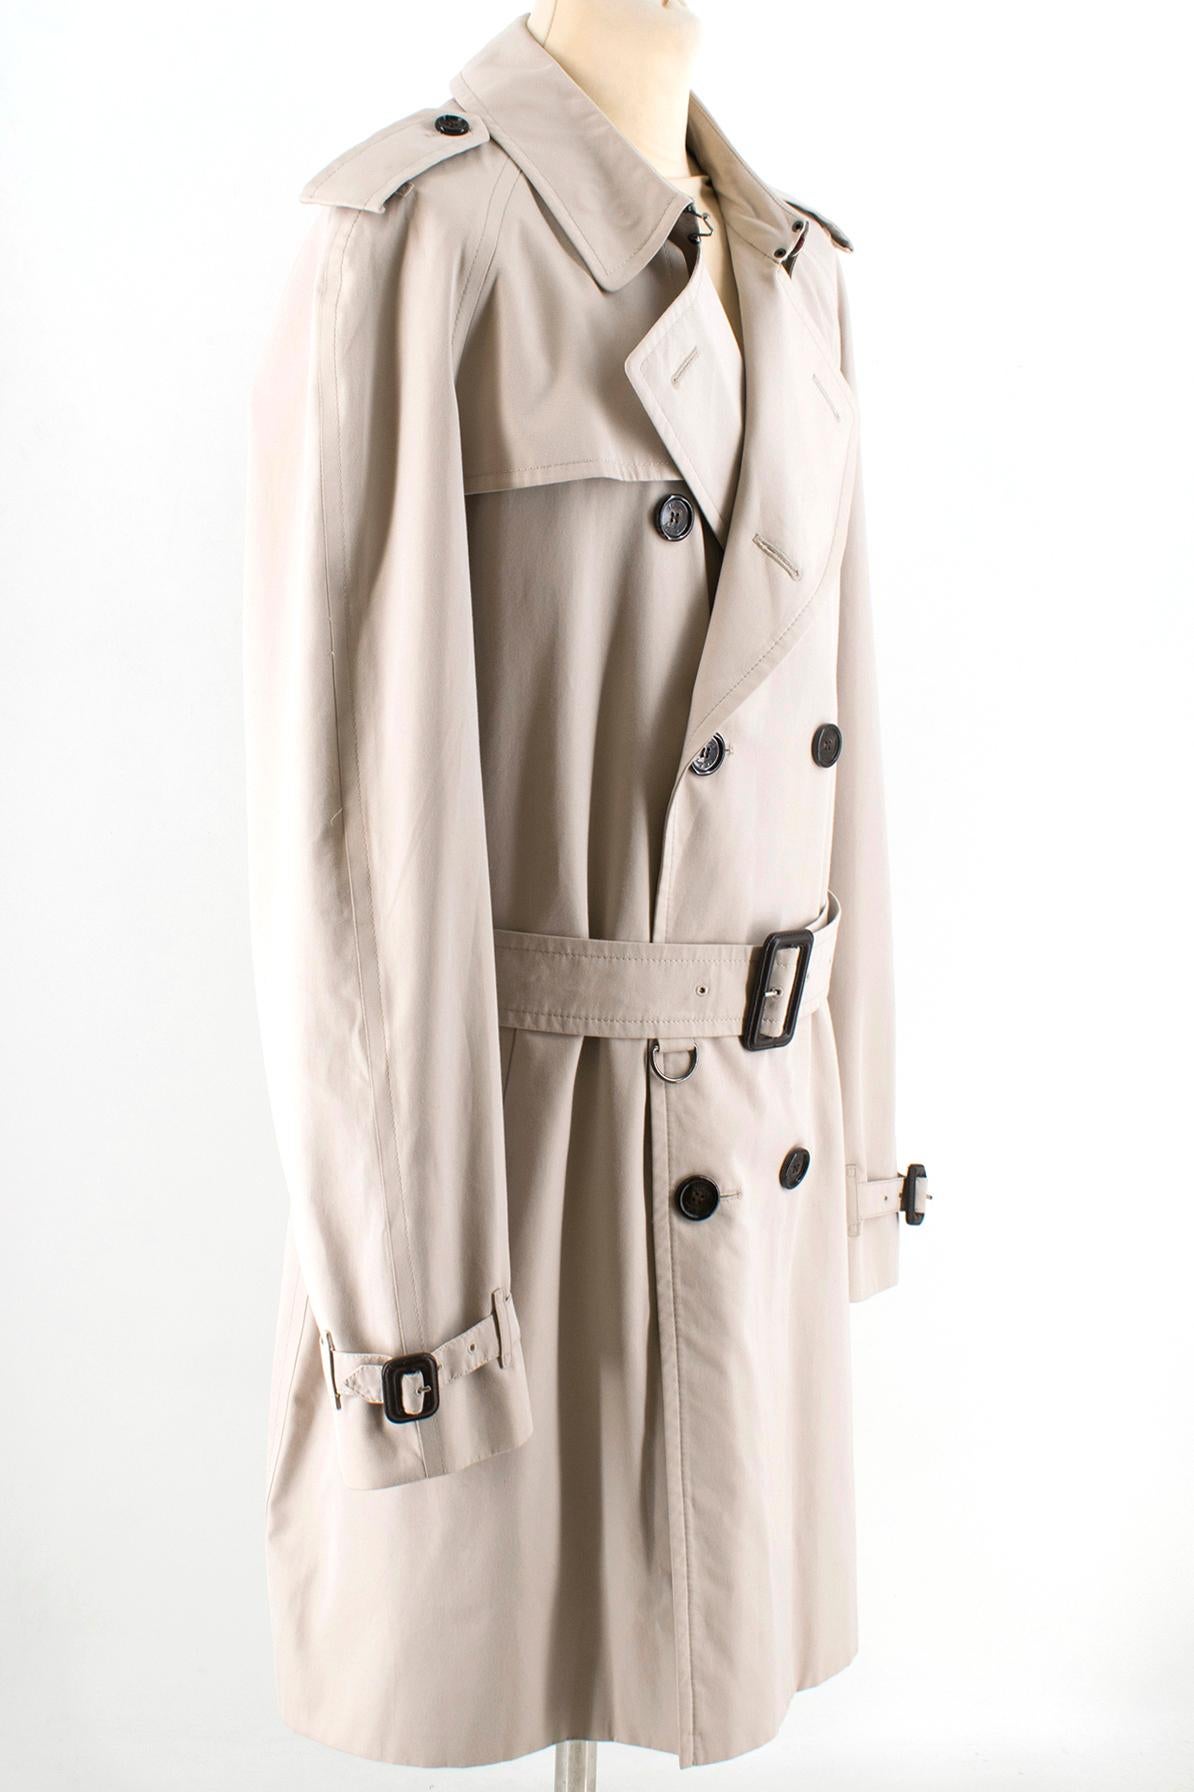 Burberry Trench Coat in Honey Brown 58 / US 48 / XXL 

Double-breasted trench coat in honey,
Button-through welt pockets,
Signature details: Epaulettes, hook-and-eye collar closure, 
Gun flap, belted cuffs, 
D-ring belt, iconic Burberry check